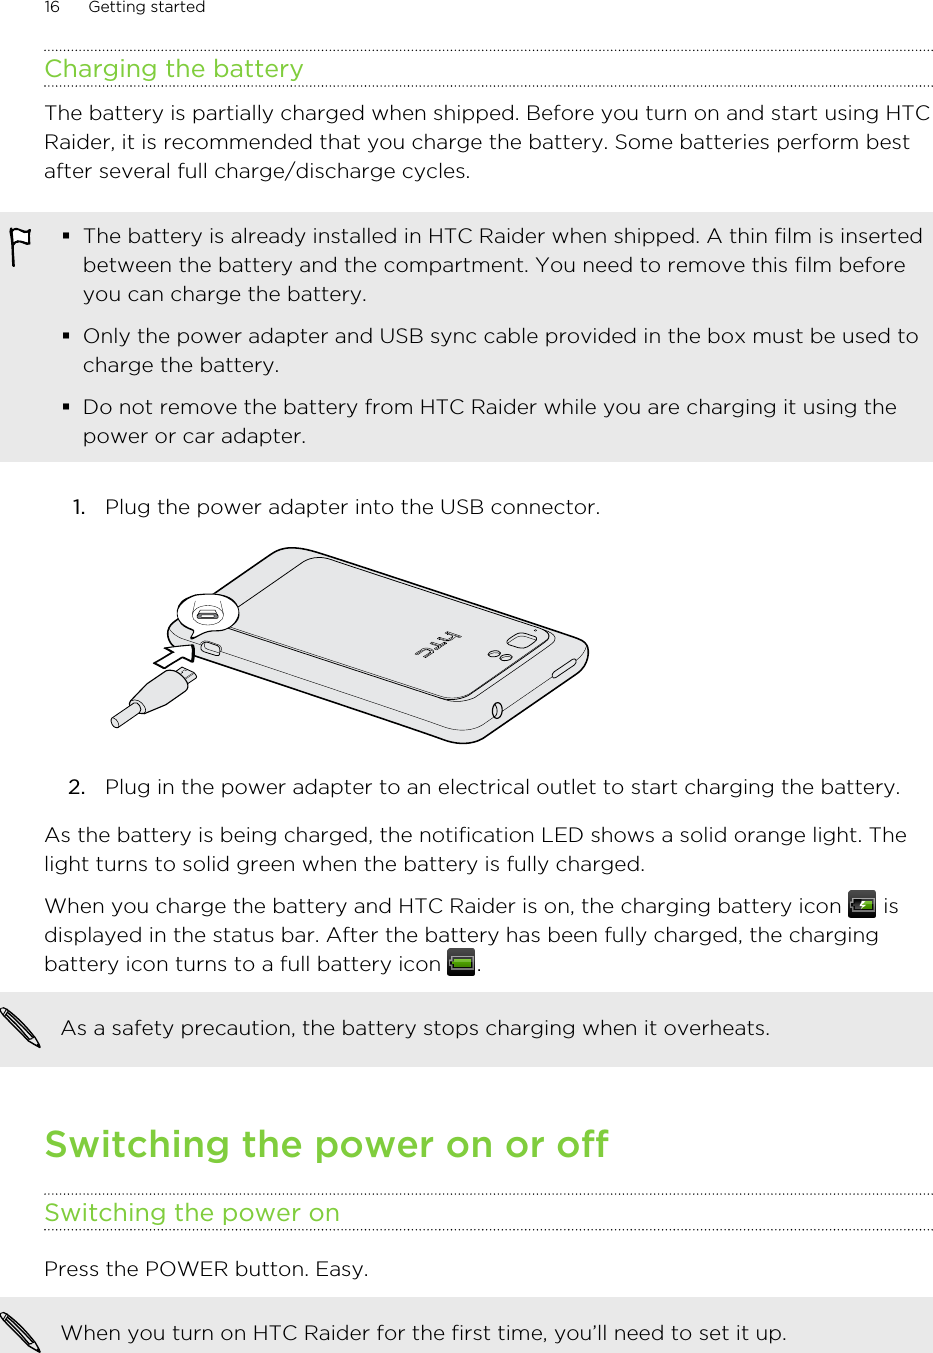 Charging the batteryThe battery is partially charged when shipped. Before you turn on and start using HTCRaider, it is recommended that you charge the battery. Some batteries perform bestafter several full charge/discharge cycles.§The battery is already installed in HTC Raider when shipped. A thin film is insertedbetween the battery and the compartment. You need to remove this film beforeyou can charge the battery.§Only the power adapter and USB sync cable provided in the box must be used tocharge the battery.§Do not remove the battery from HTC Raider while you are charging it using thepower or car adapter.1. Plug the power adapter into the USB connector. 2. Plug in the power adapter to an electrical outlet to start charging the battery.As the battery is being charged, the notification LED shows a solid orange light. Thelight turns to solid green when the battery is fully charged.When you charge the battery and HTC Raider is on, the charging battery icon   isdisplayed in the status bar. After the battery has been fully charged, the chargingbattery icon turns to a full battery icon  .As a safety precaution, the battery stops charging when it overheats.Switching the power on or offSwitching the power onPress the POWER button. Easy. When you turn on HTC Raider for the first time, you’ll need to set it up.16 Getting started